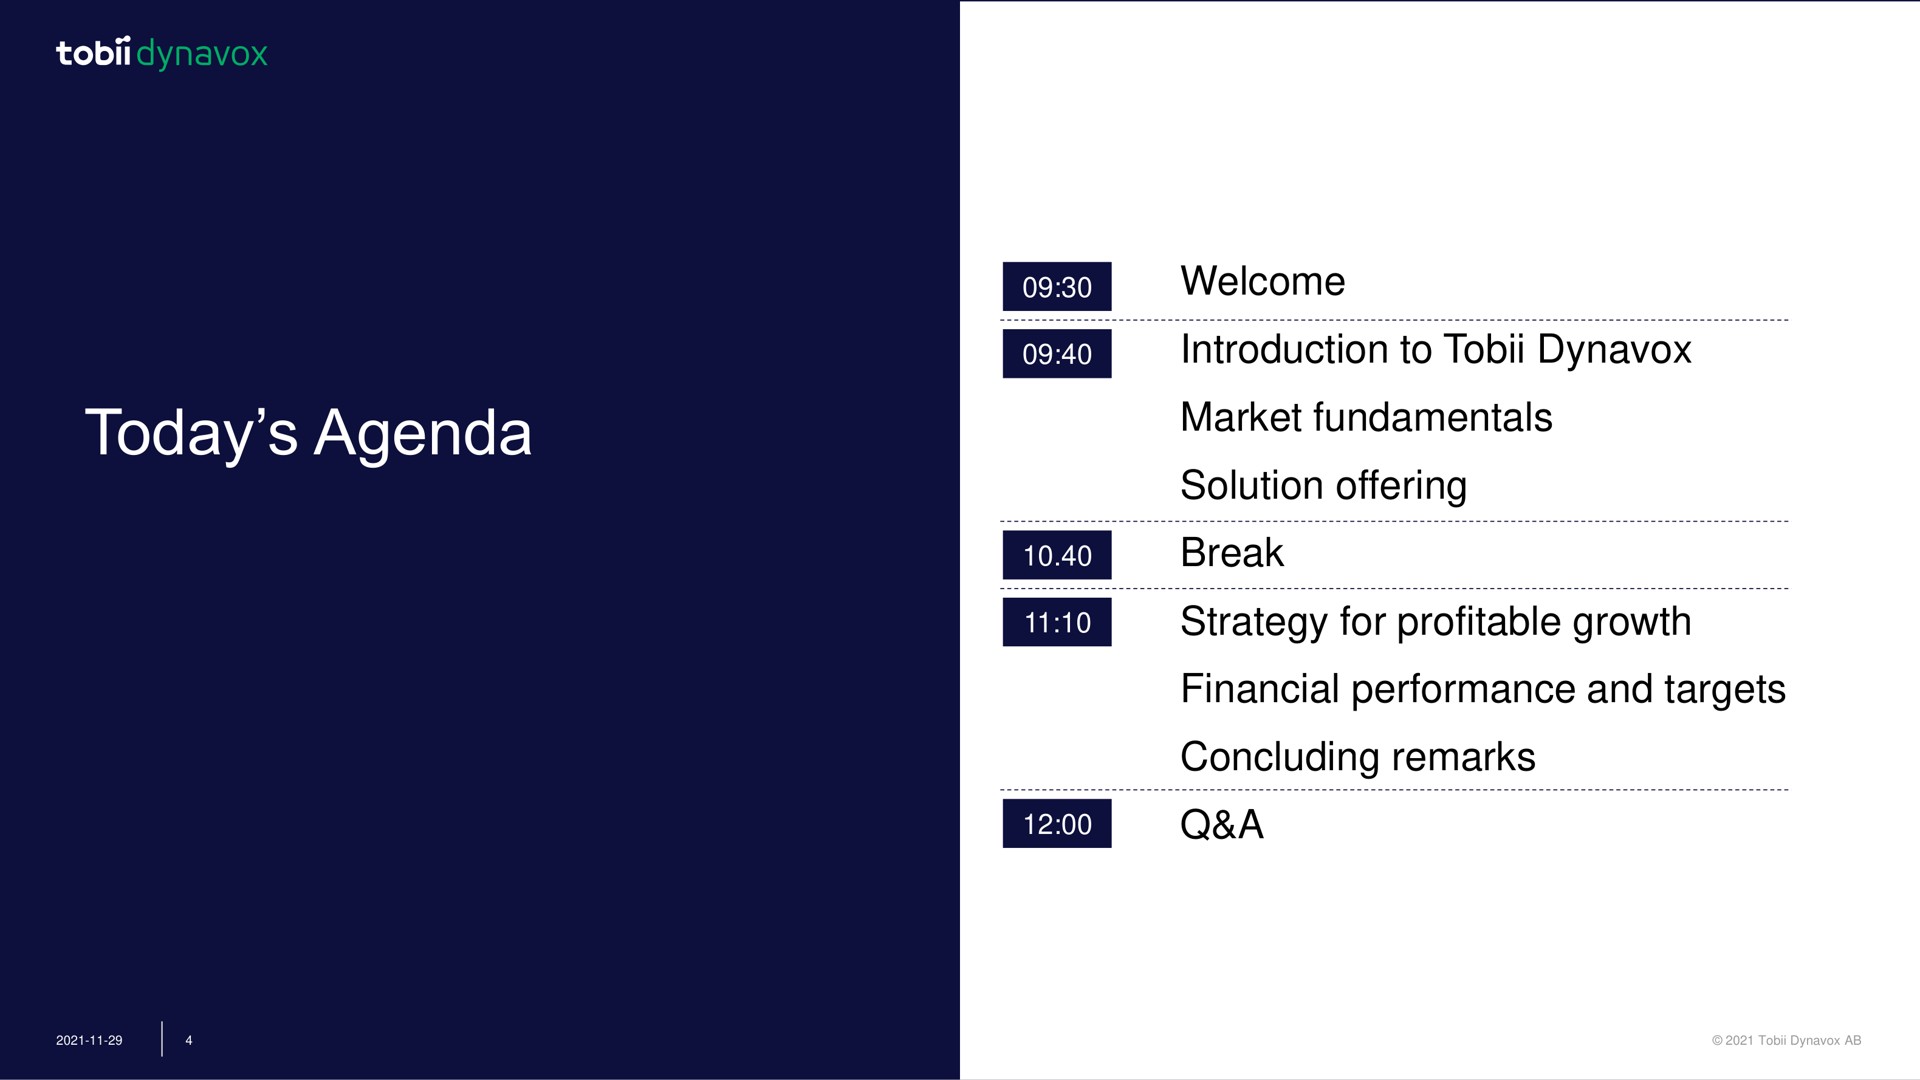 today agenda welcome introduction to market fundamentals solution offering break strategy for profitable growth financial performance and targets concluding remarks a | Tobii Dynavox